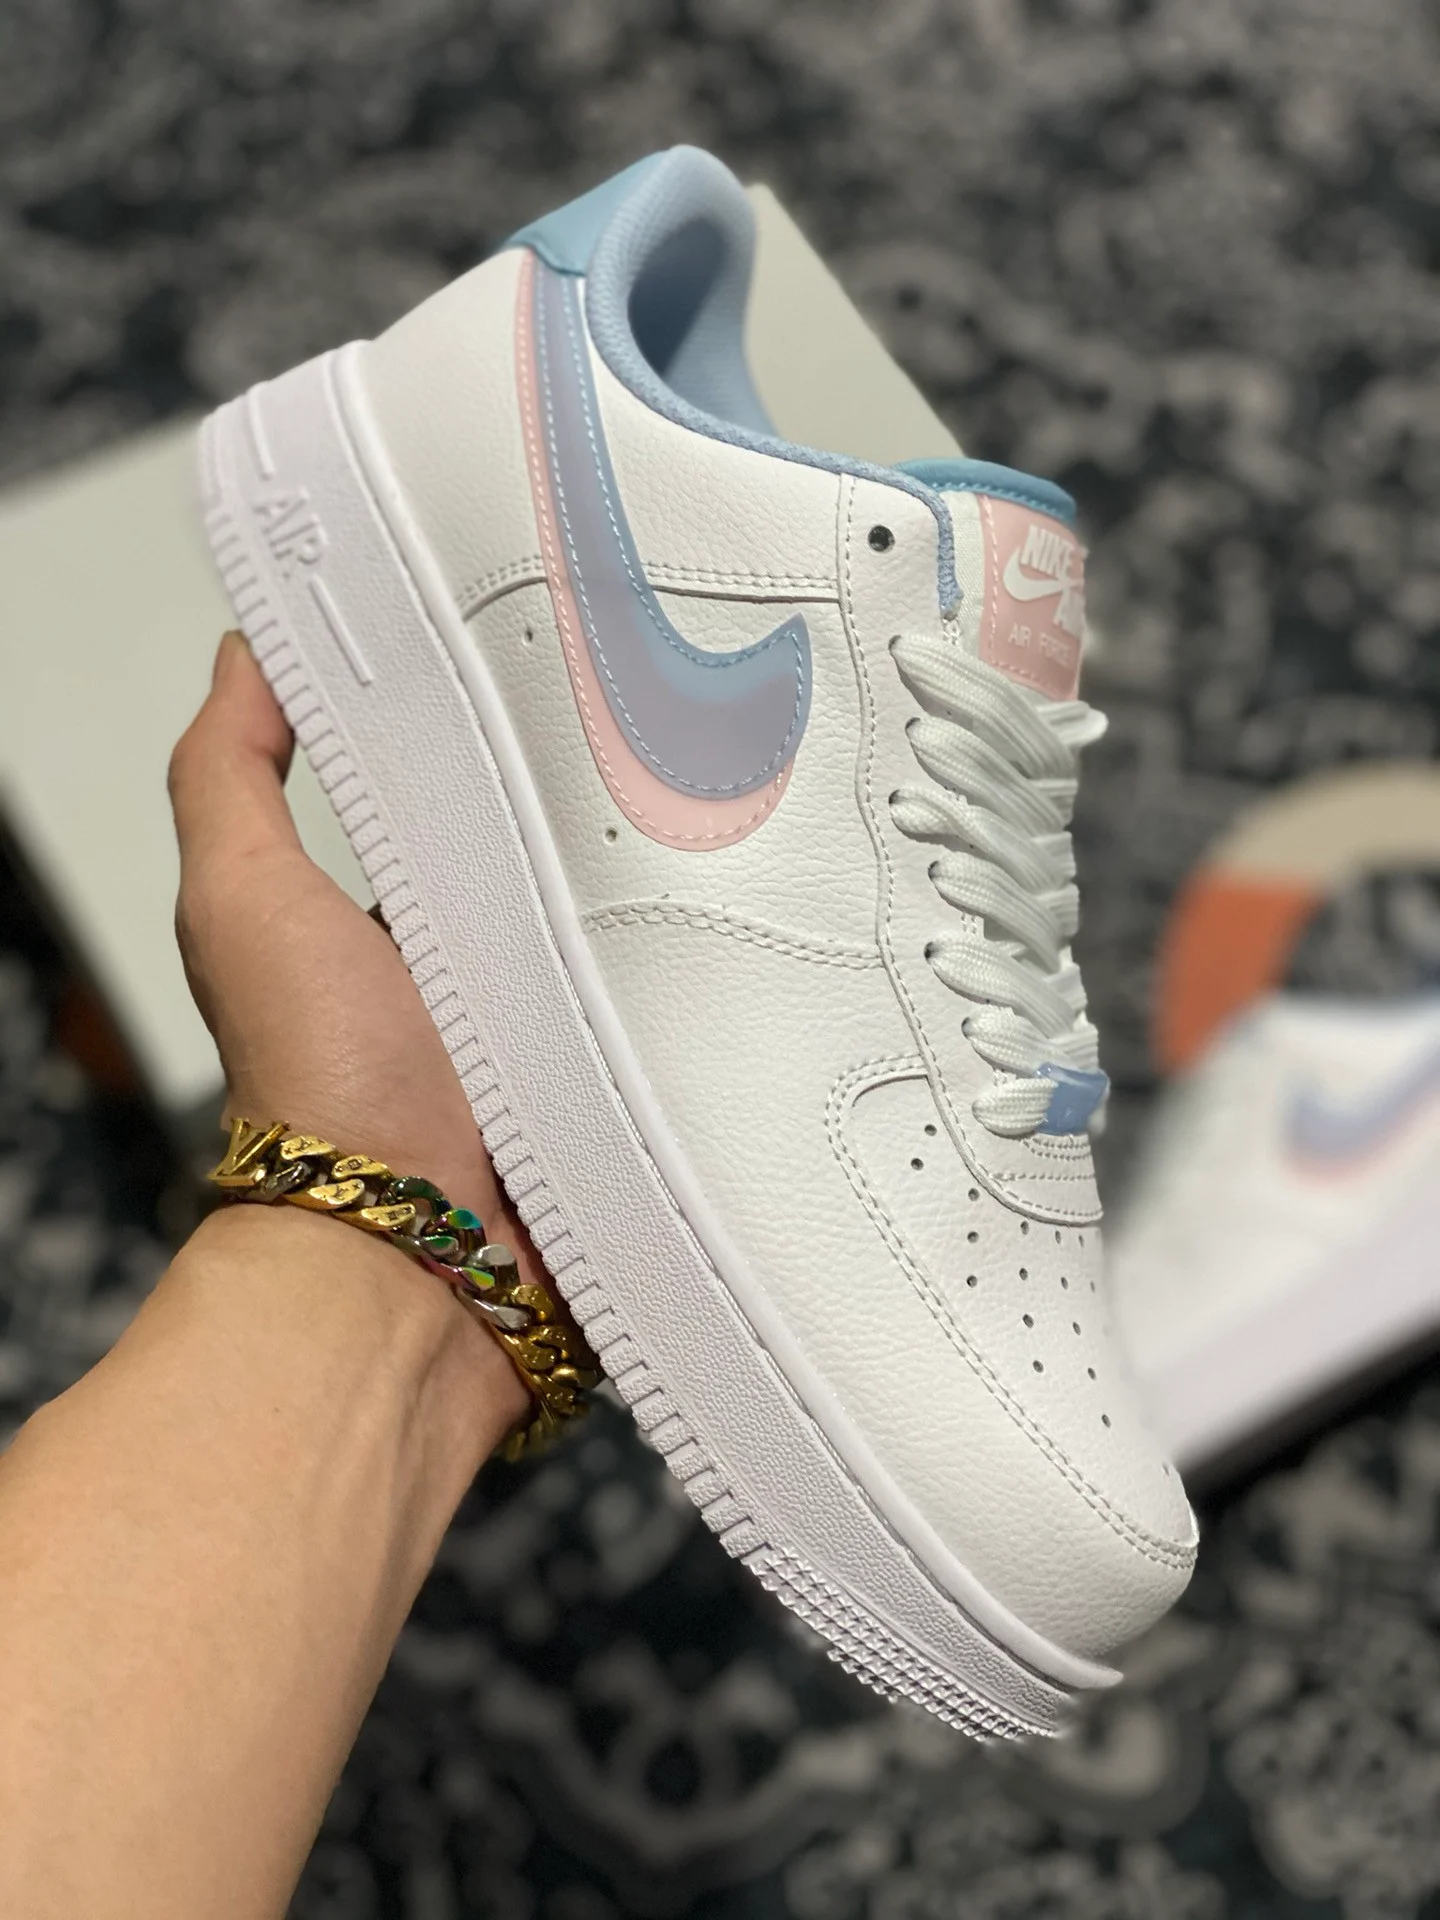 Nike Air Force 1 Low Double Swoosh White Light Armory Blue-Arctic Punch For Sale